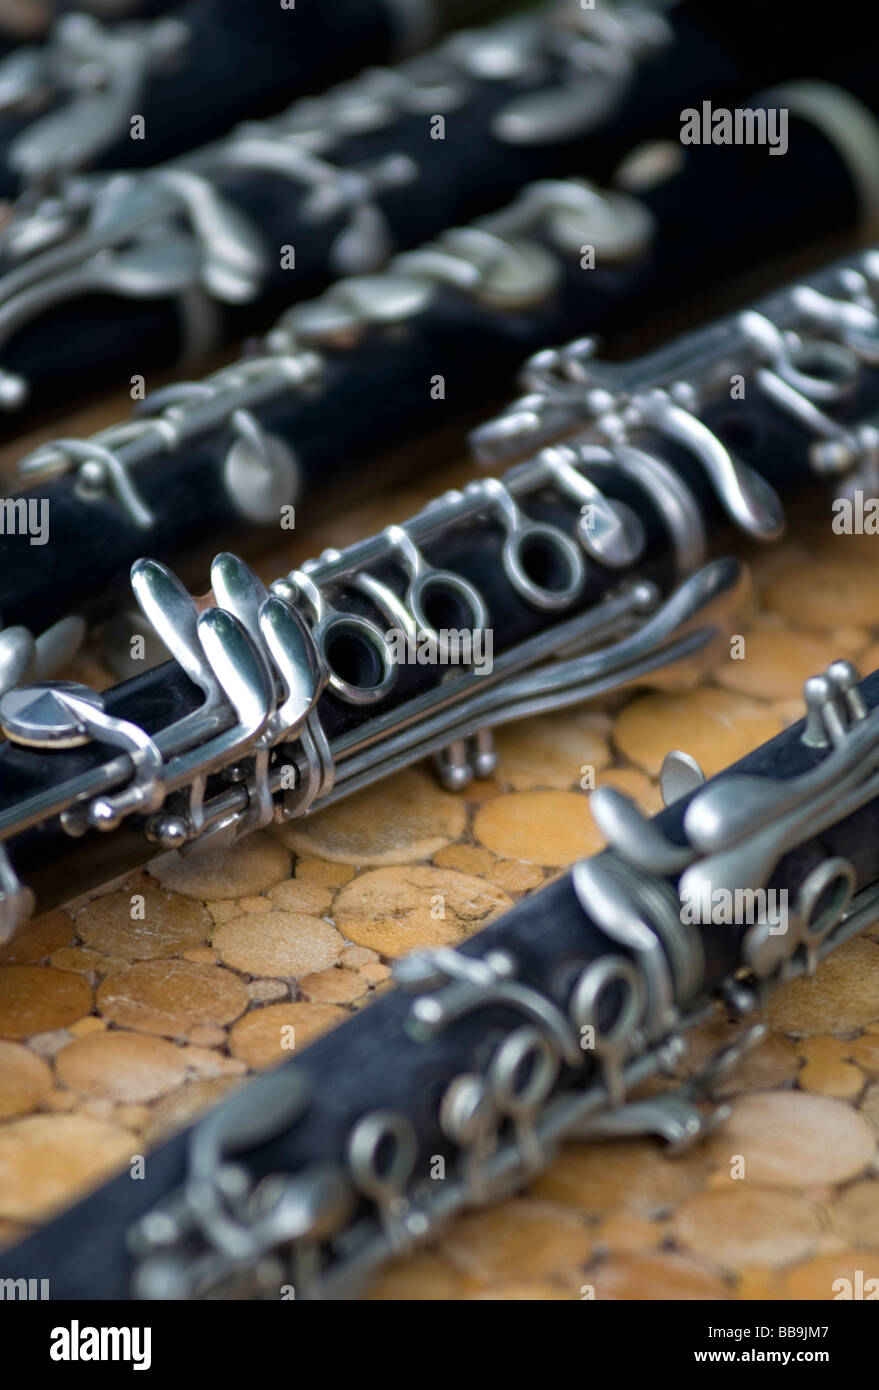 Second-hand clarinets for sale on a market stall Stock Photo